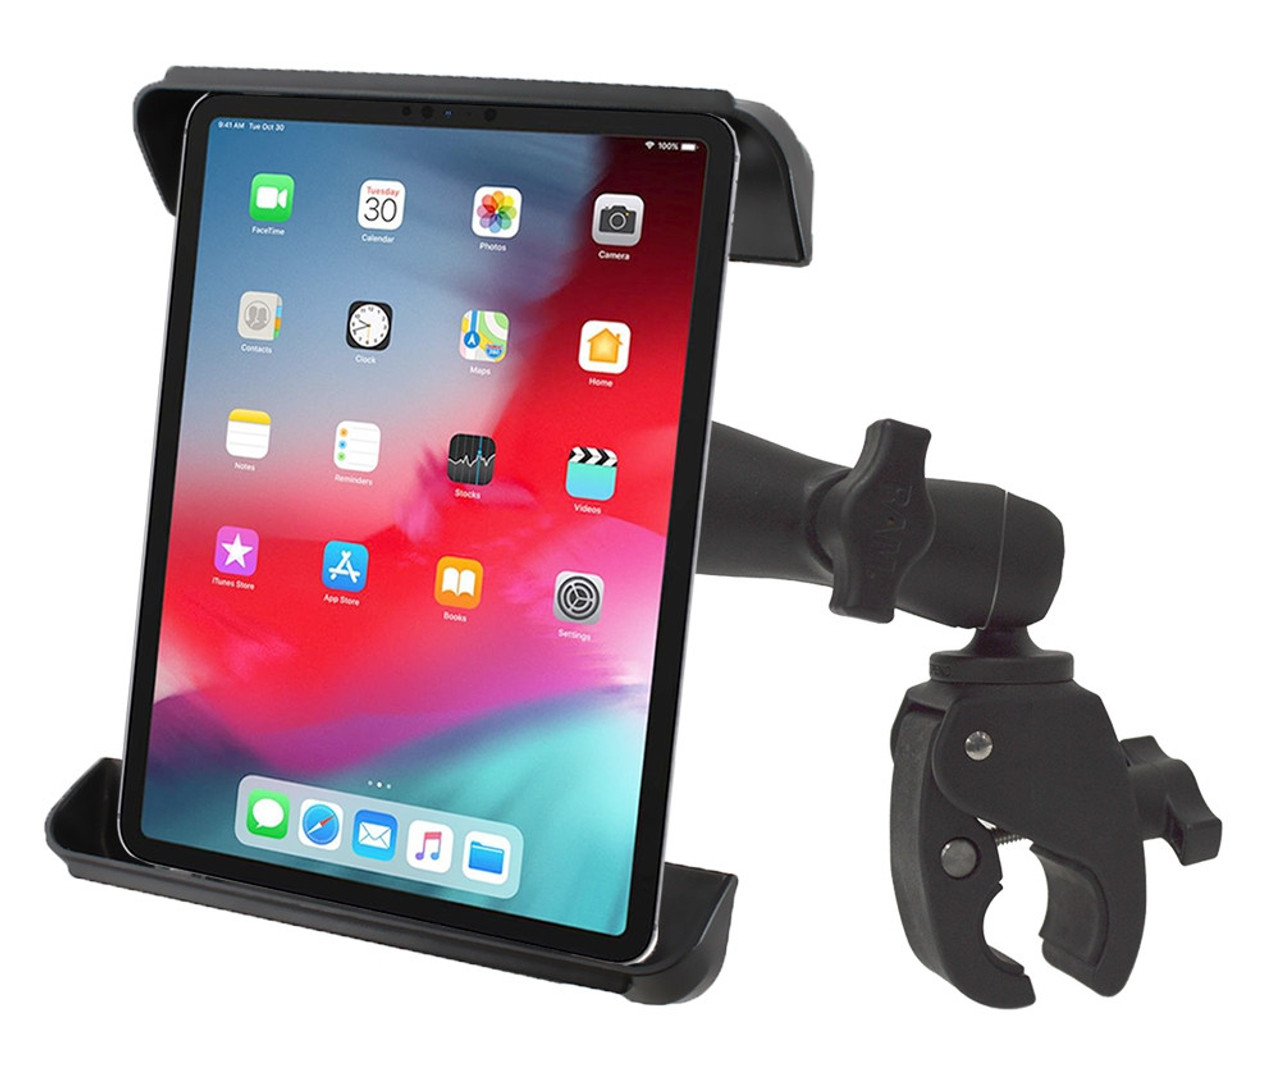 Handsfree Book Seat Book Tablet and iPad Holder